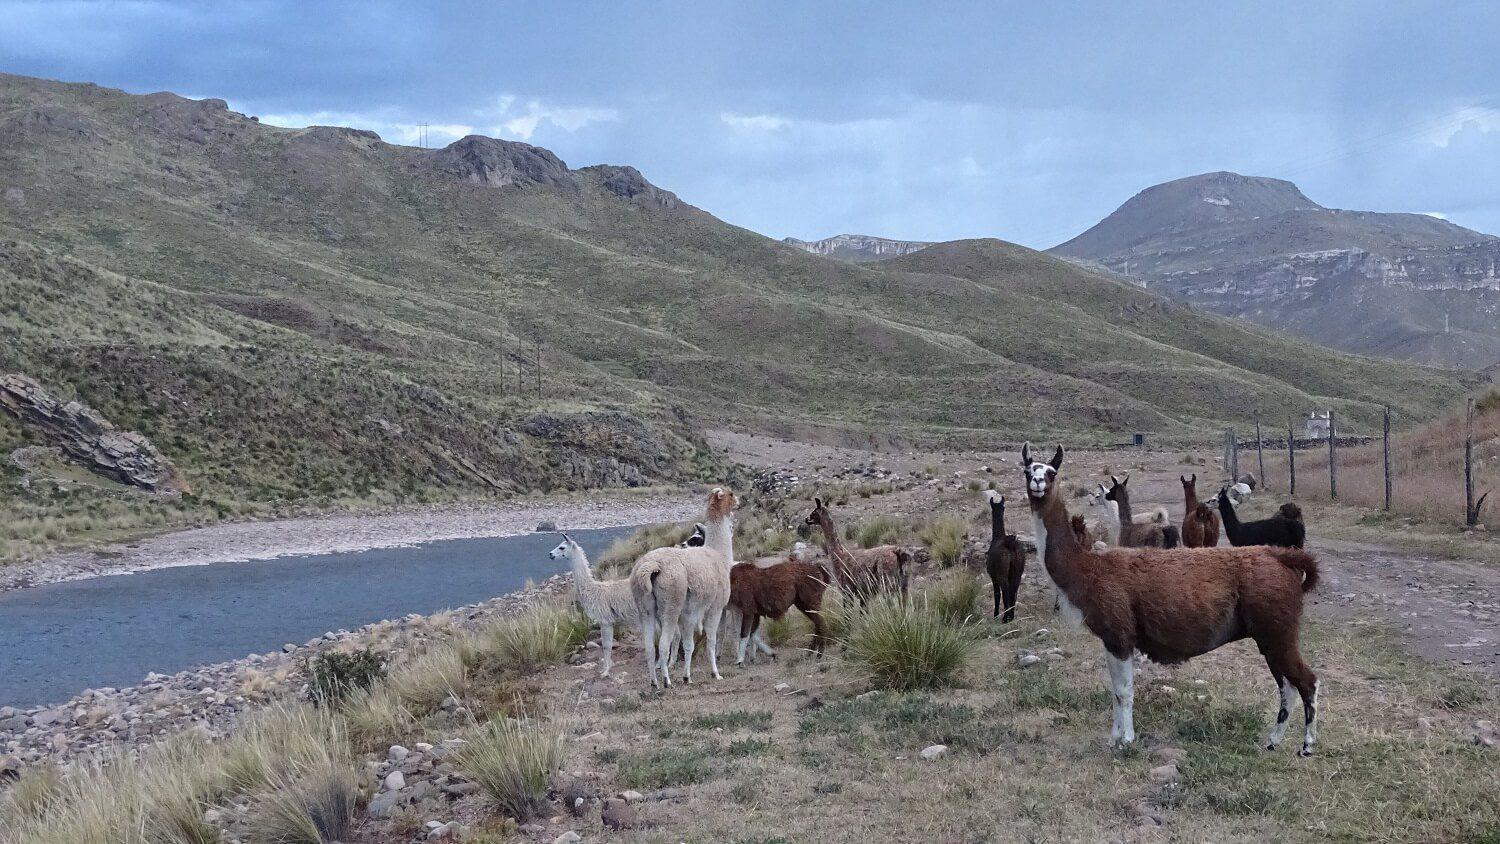 A herd of lamas on our hike in Sibayo, Colca Canyon | RESPONSible Travel Peru